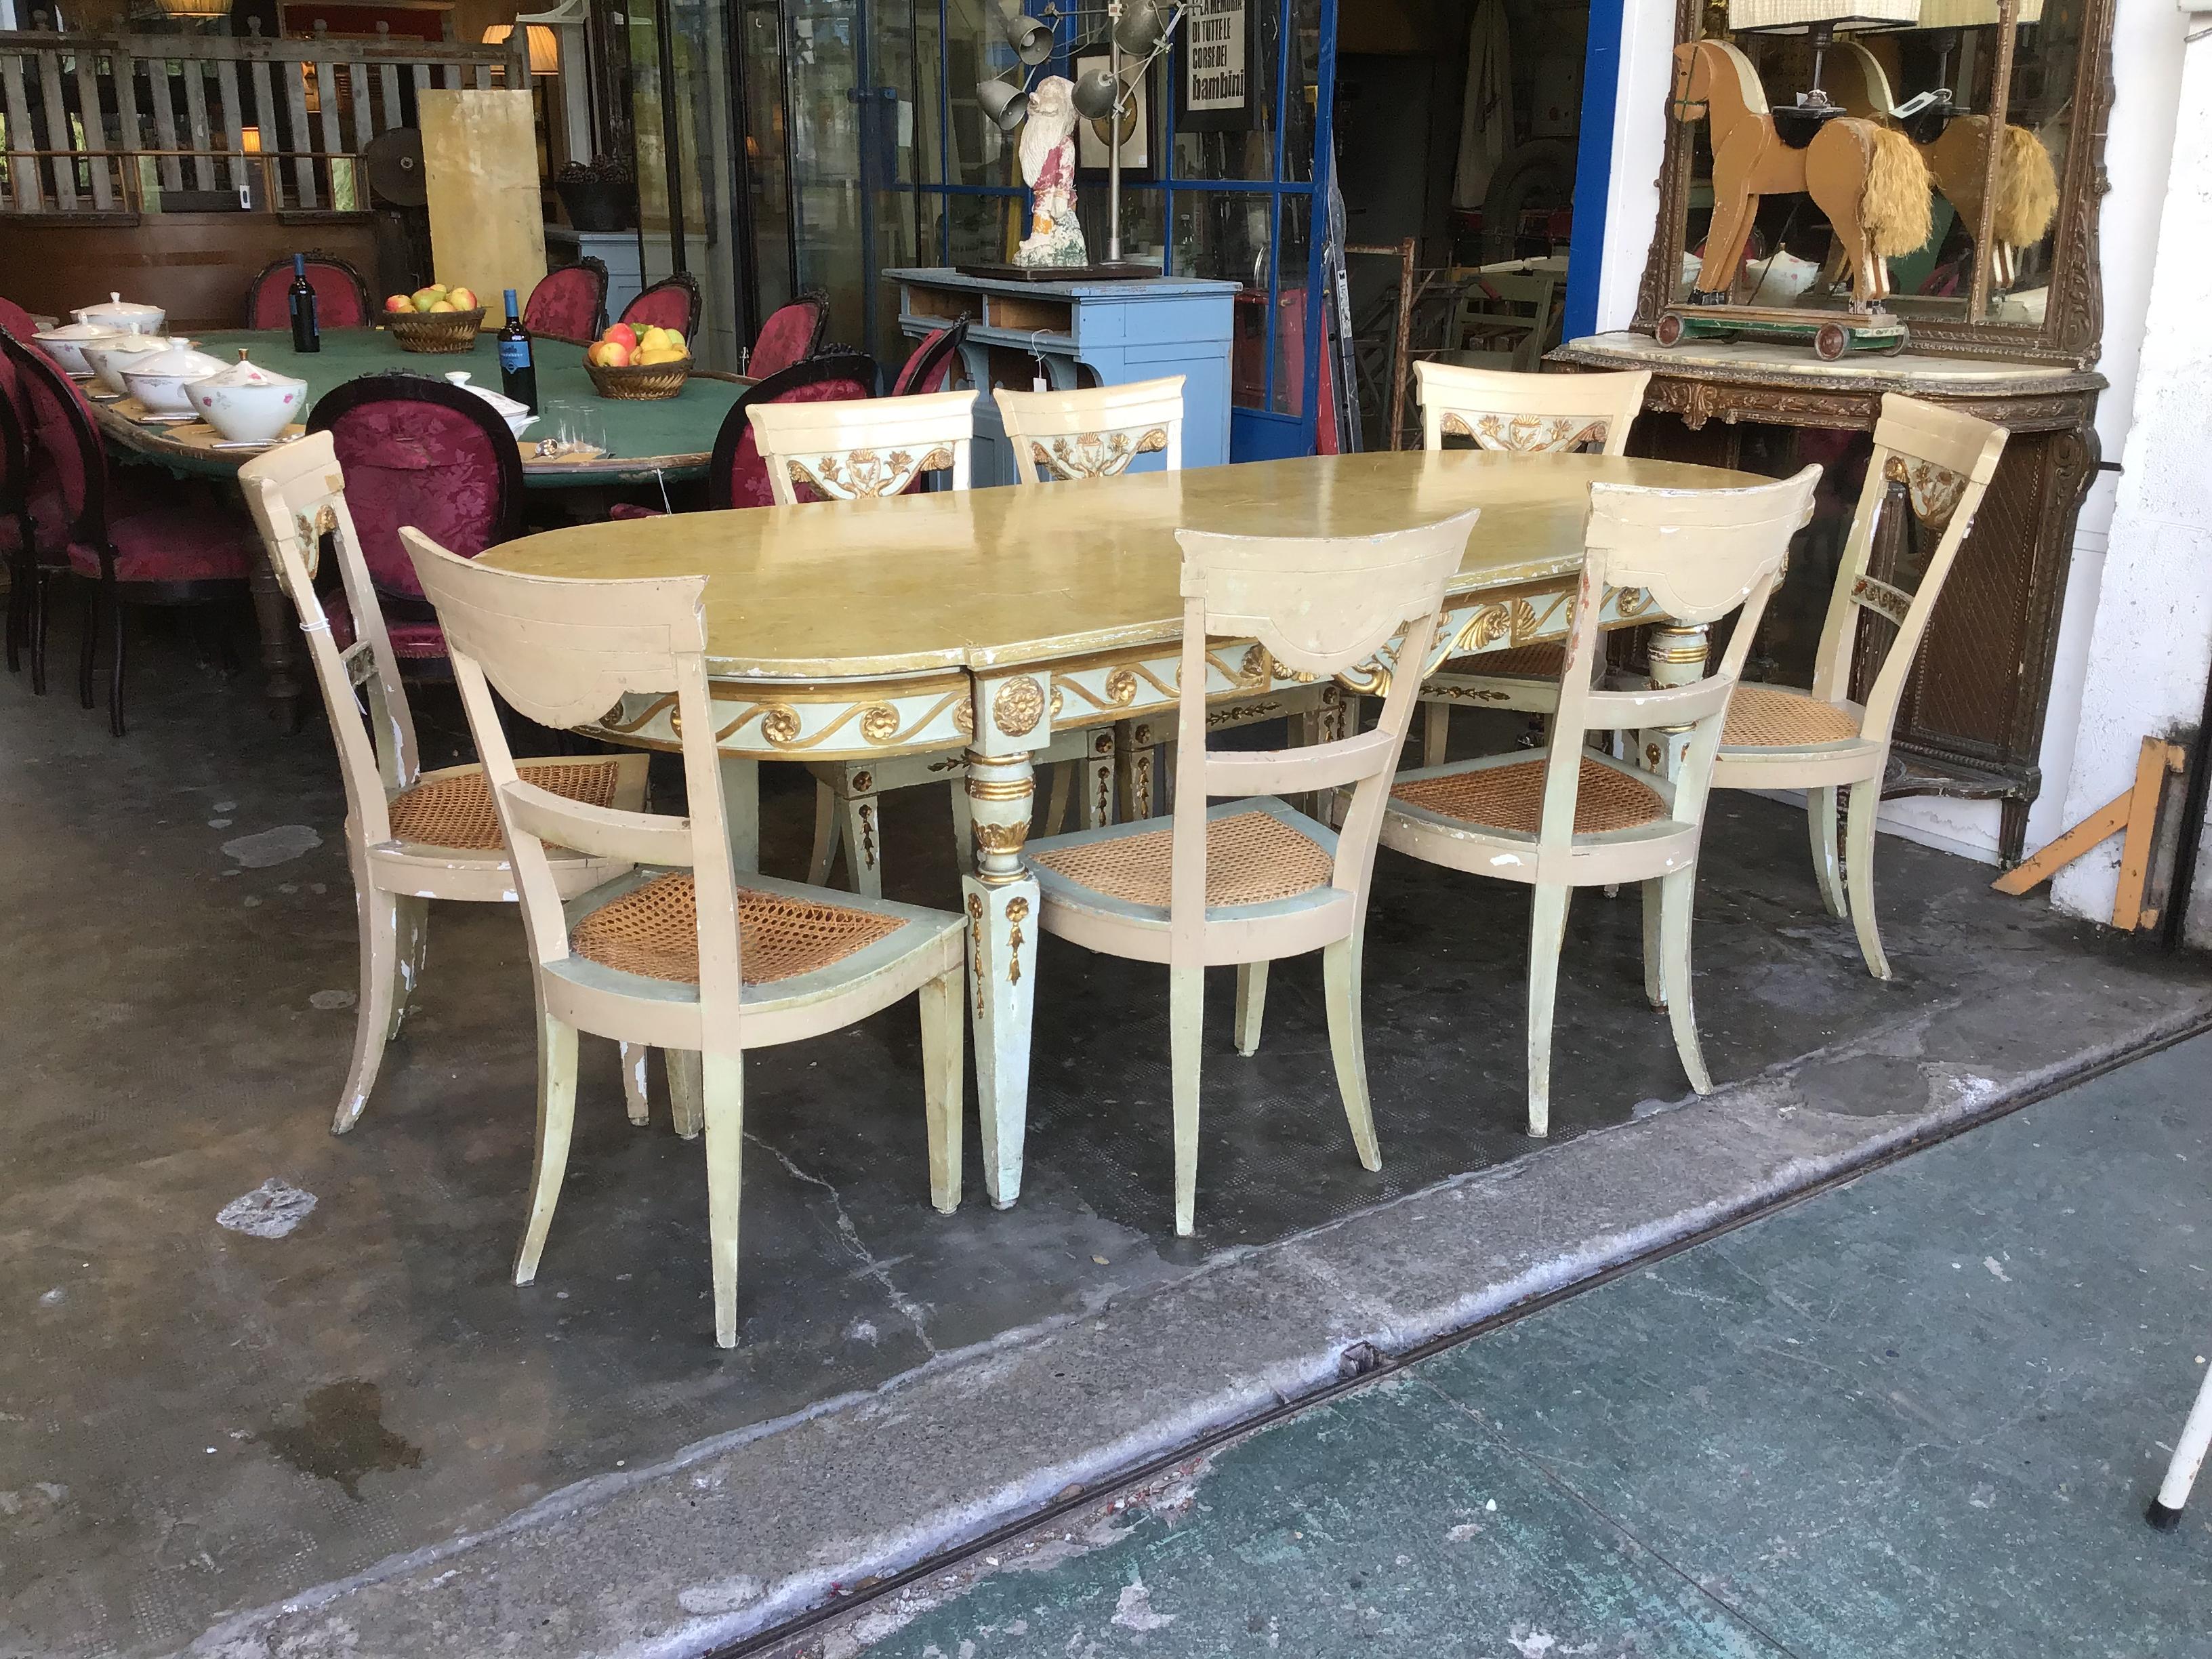 19th century Italian lacquered wood dining room set composed by one table with drawers and eight chairs with Vienna Straw.
The whole set is in very good vintage condition except one of the chairs that has some damages on the Vienna straw. It is